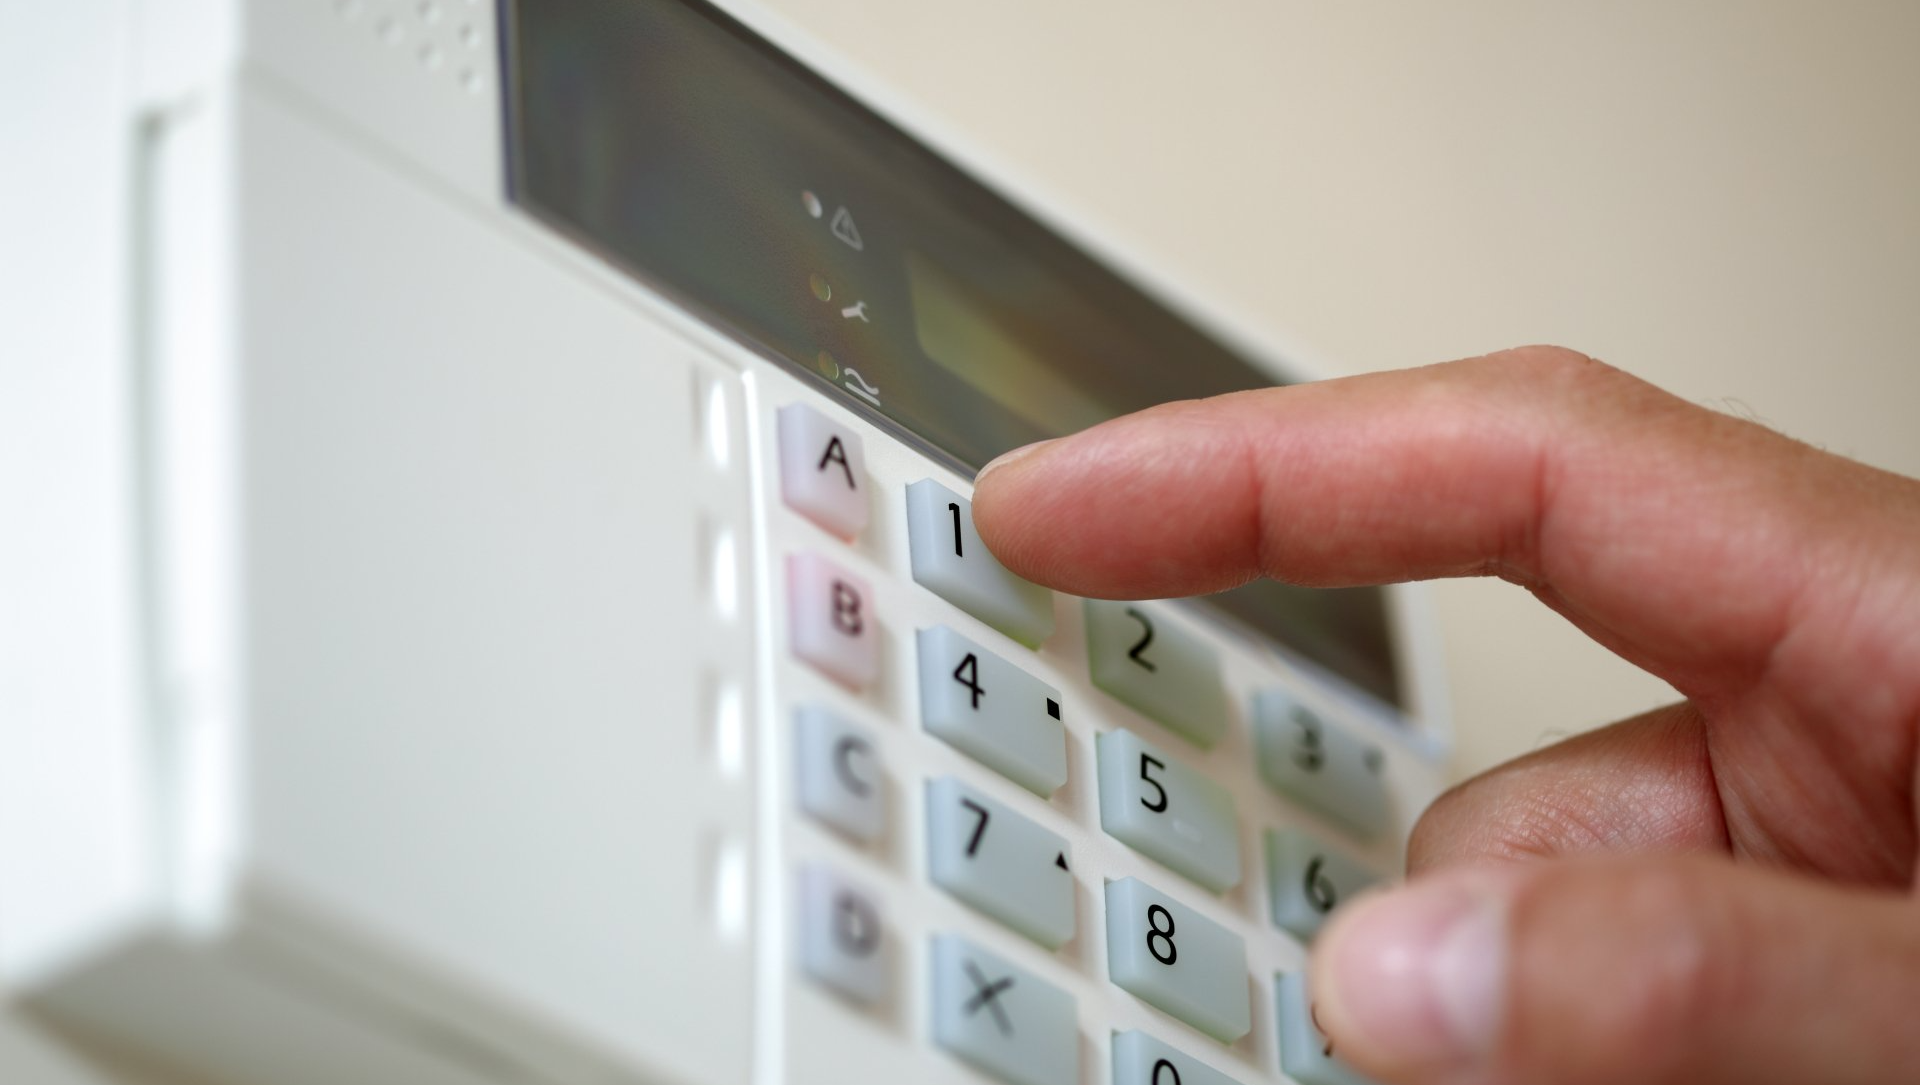 Close up of hand pushing numbers on an alarm keypad